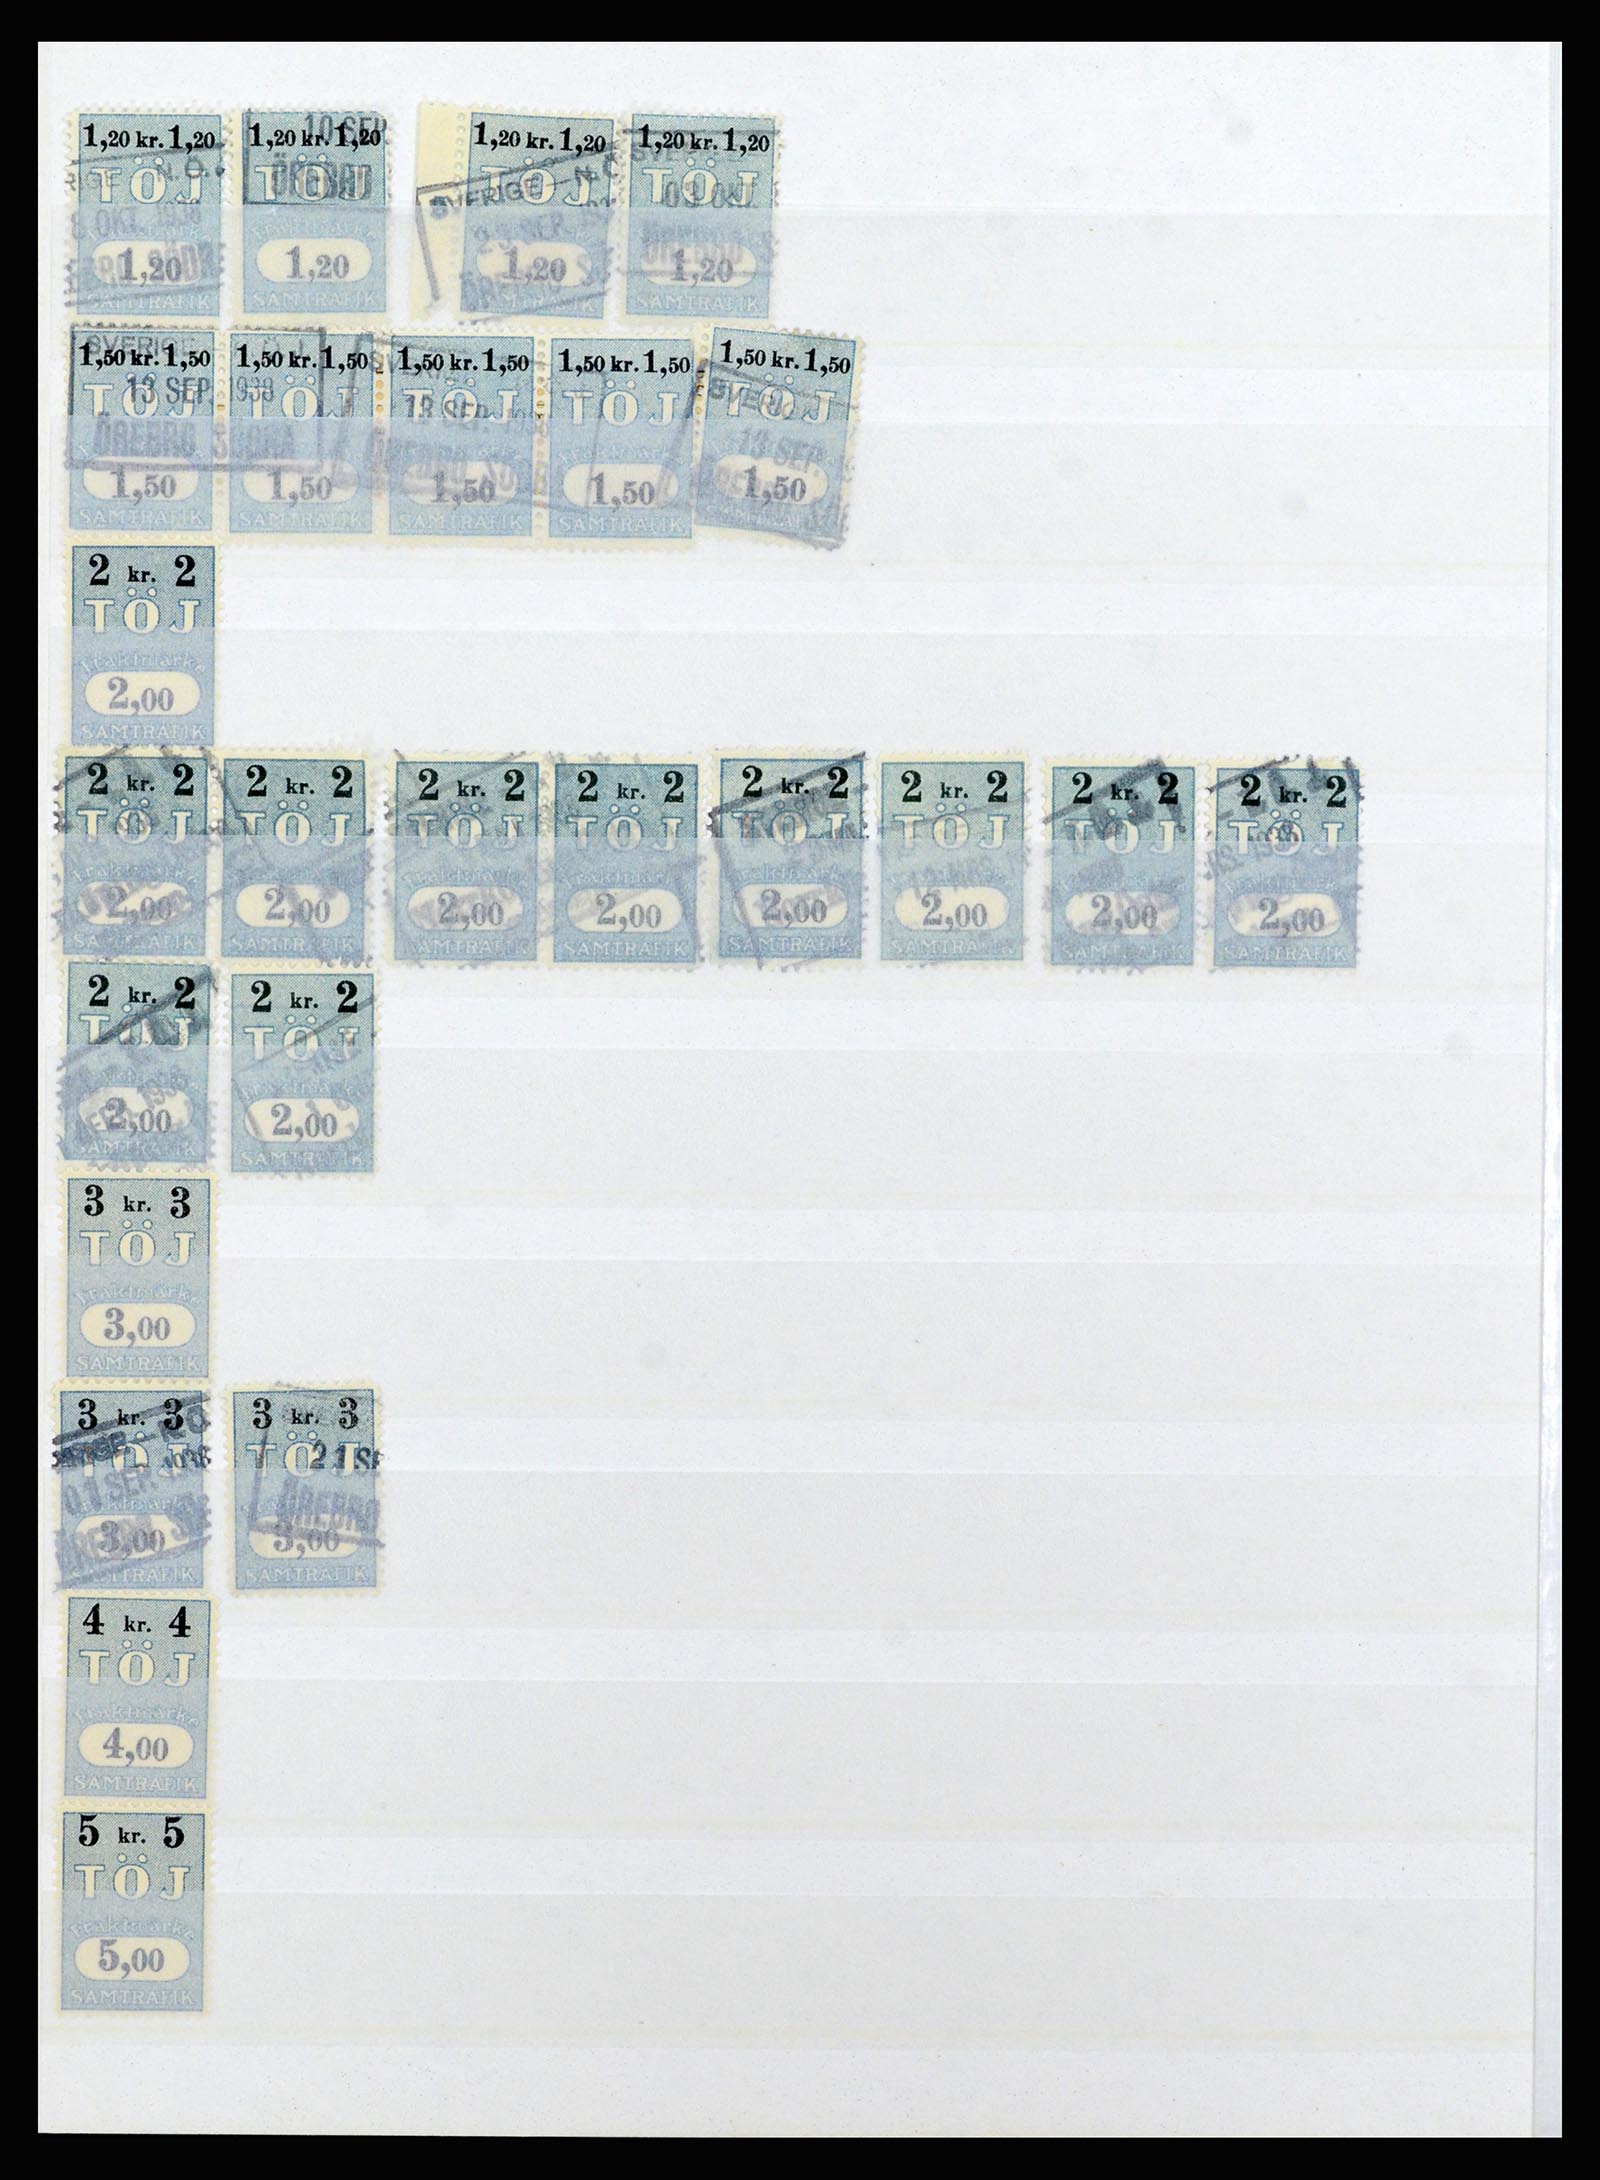 36981 022 - Stamp collection 36981 Scandinavia railroadstamps.